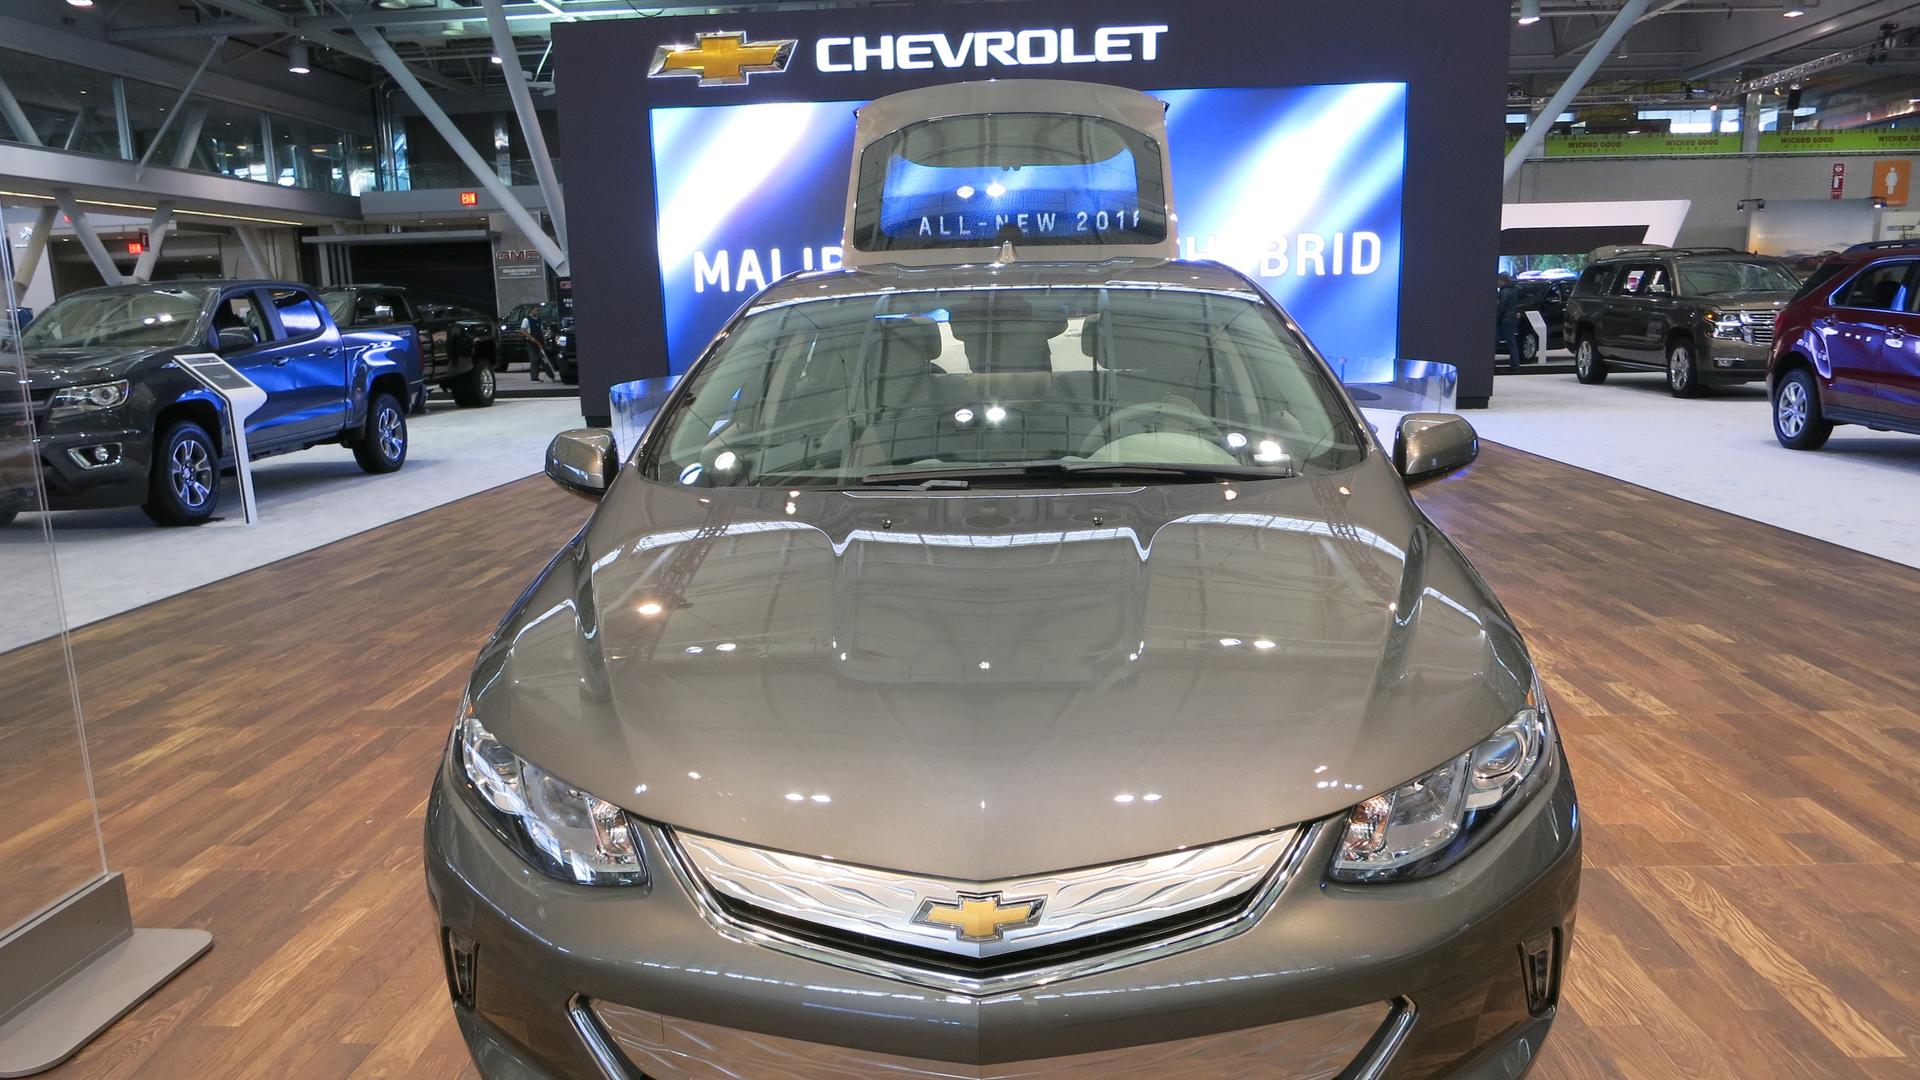 Hybrid vehicles like the Chevrolet Volt were front and center at Boston's auto show. 